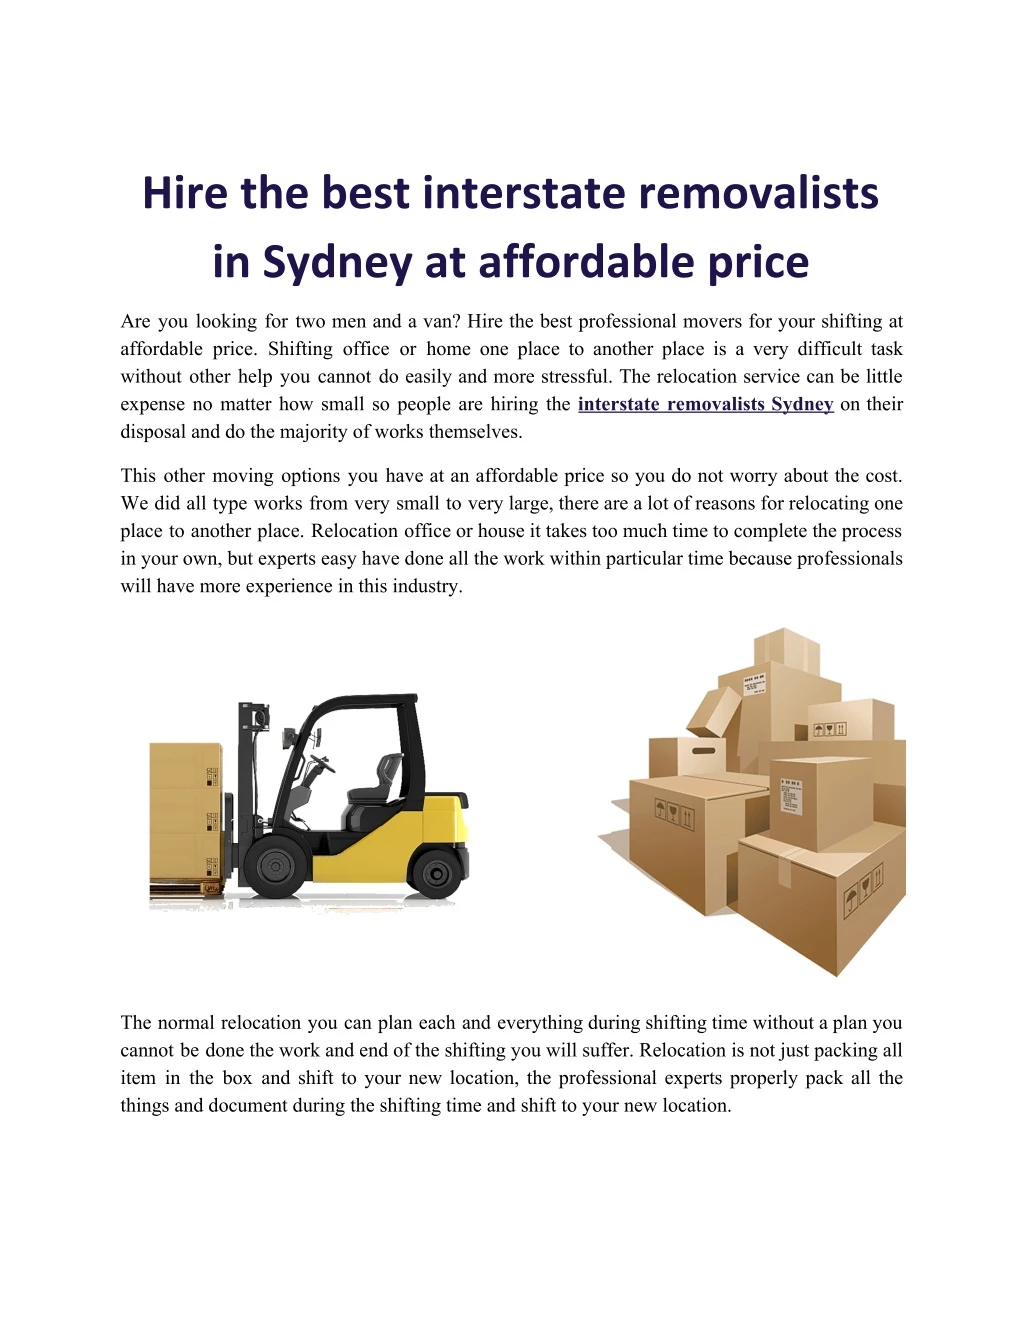 hire the best interstate removalists in sydney